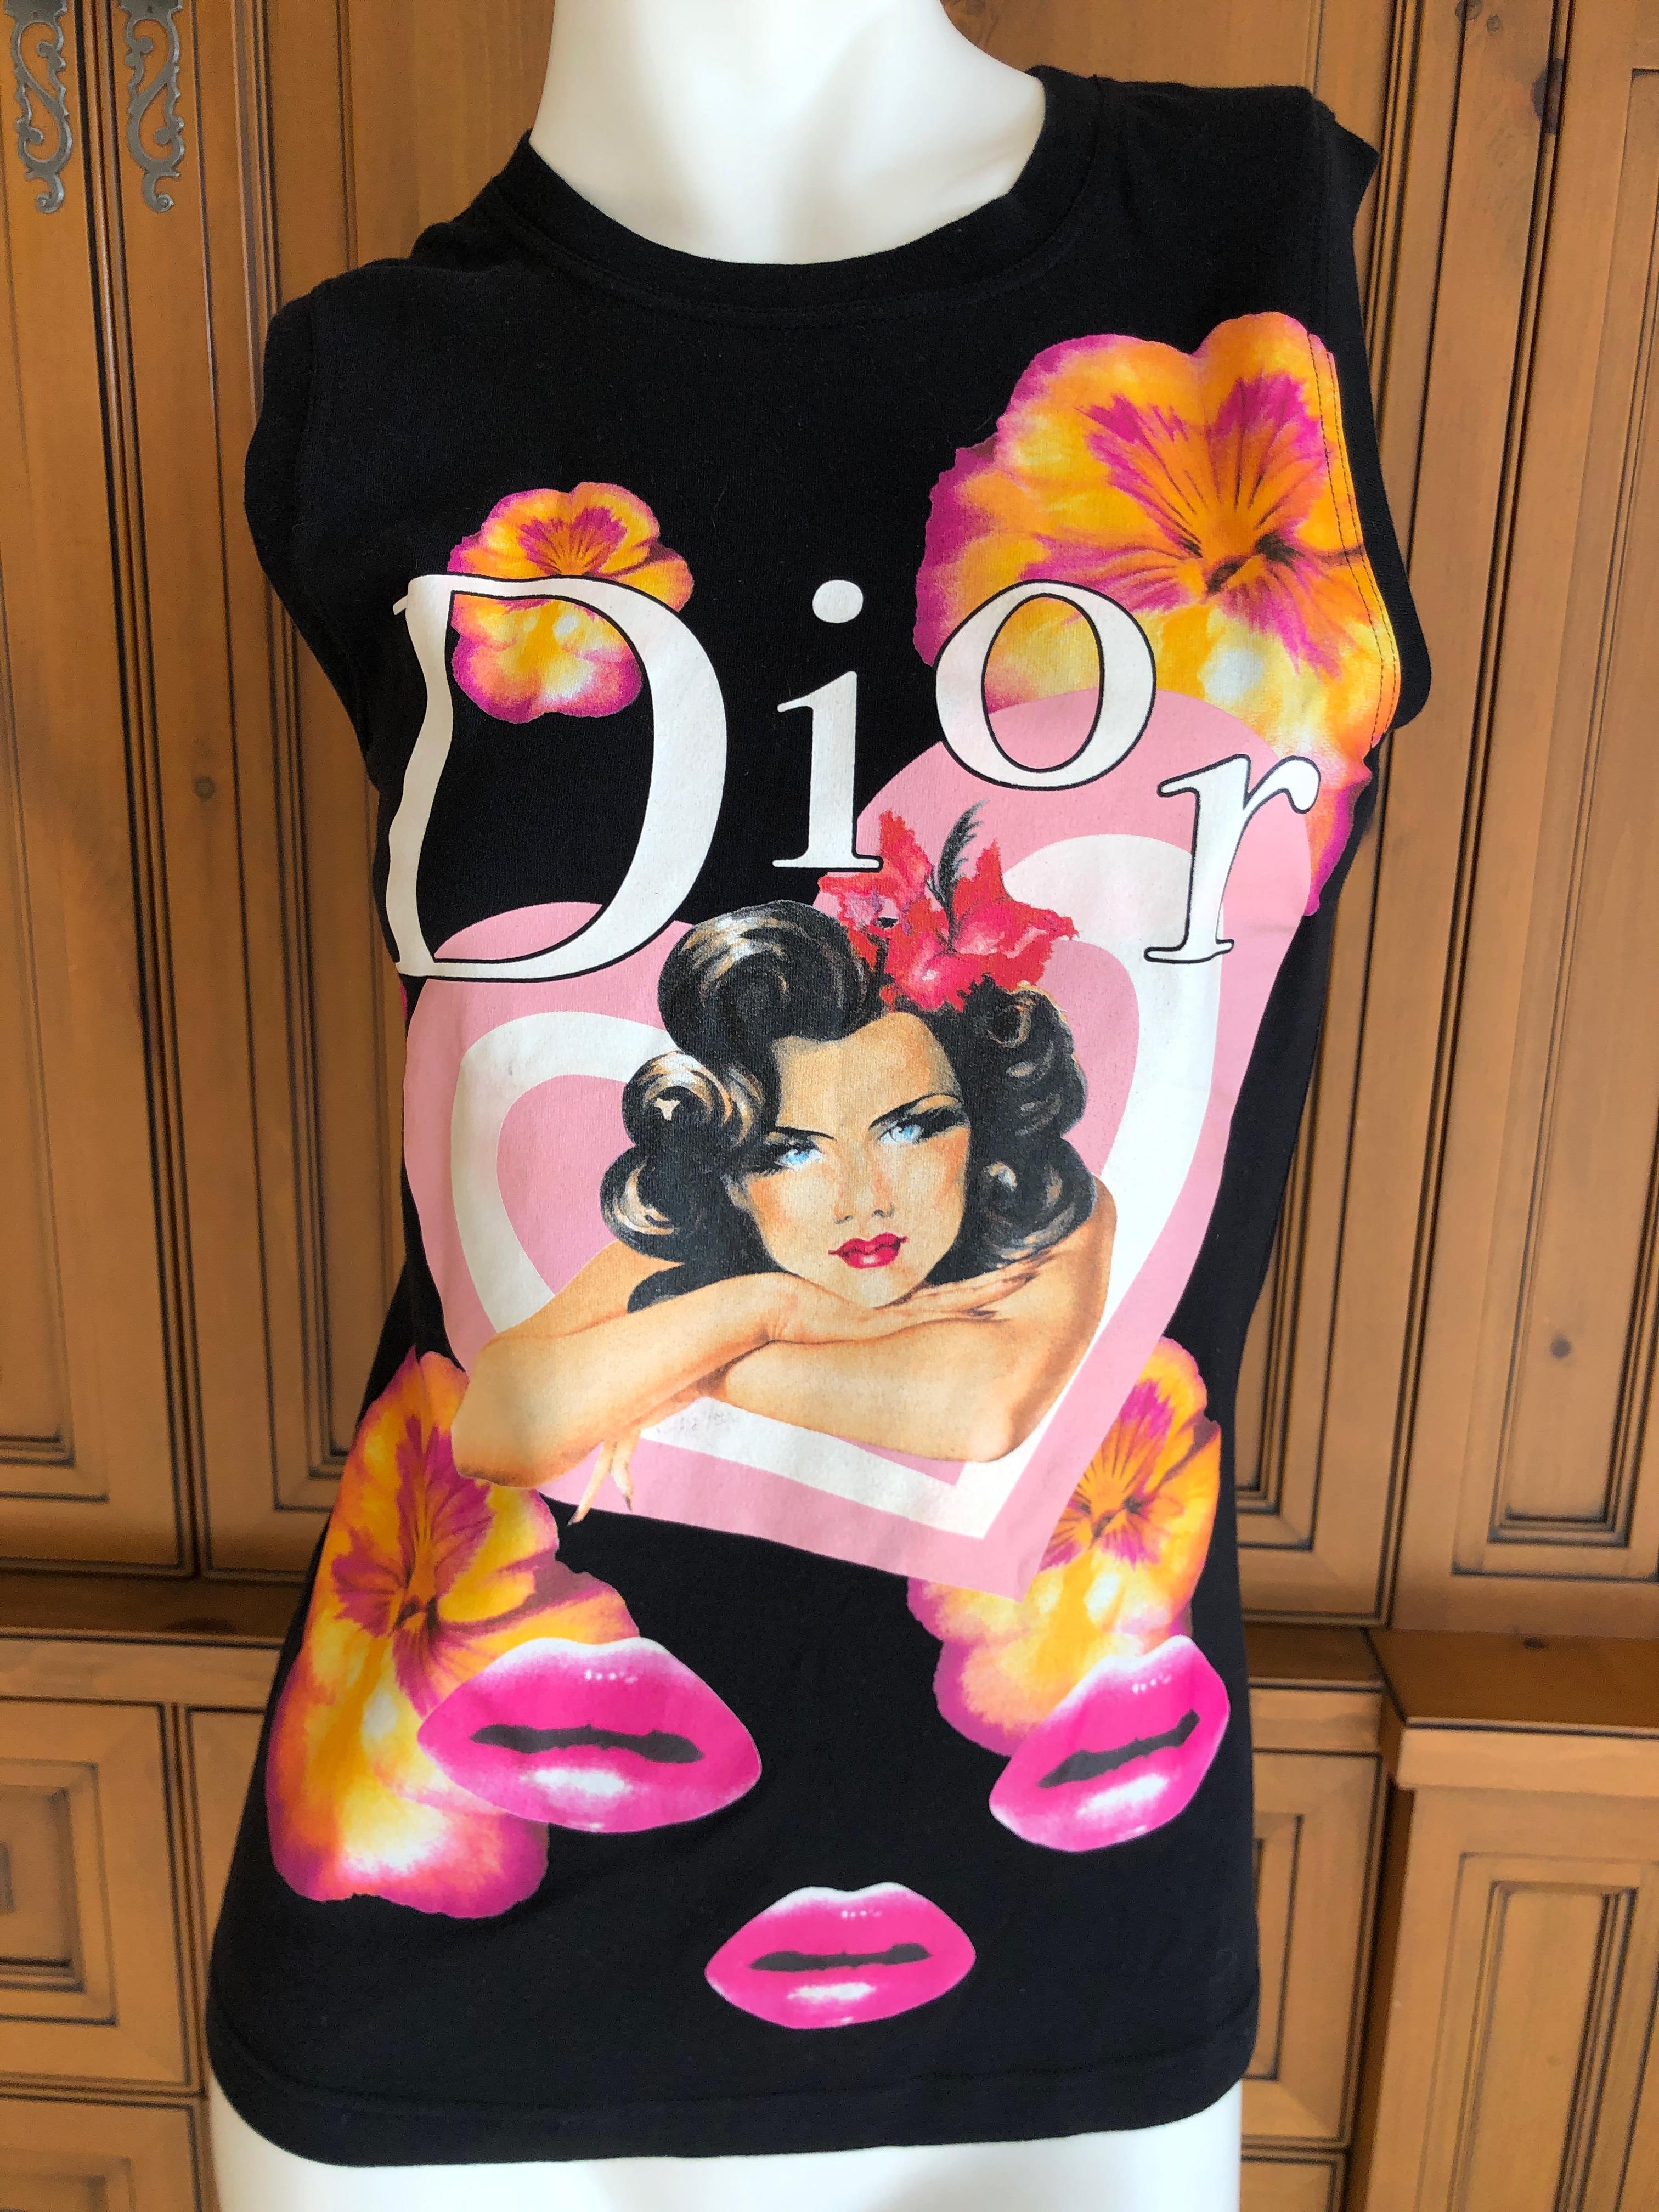 Dior by John Galliano Surrealist Lip Print two piece set.
Cotton sleeveless top, with a cashmere zip front cardigan with ribbed collar and cuffs.
 This is so pretty, in one of my favorite patterns, the surrealist lips and pansy flower print.
Size